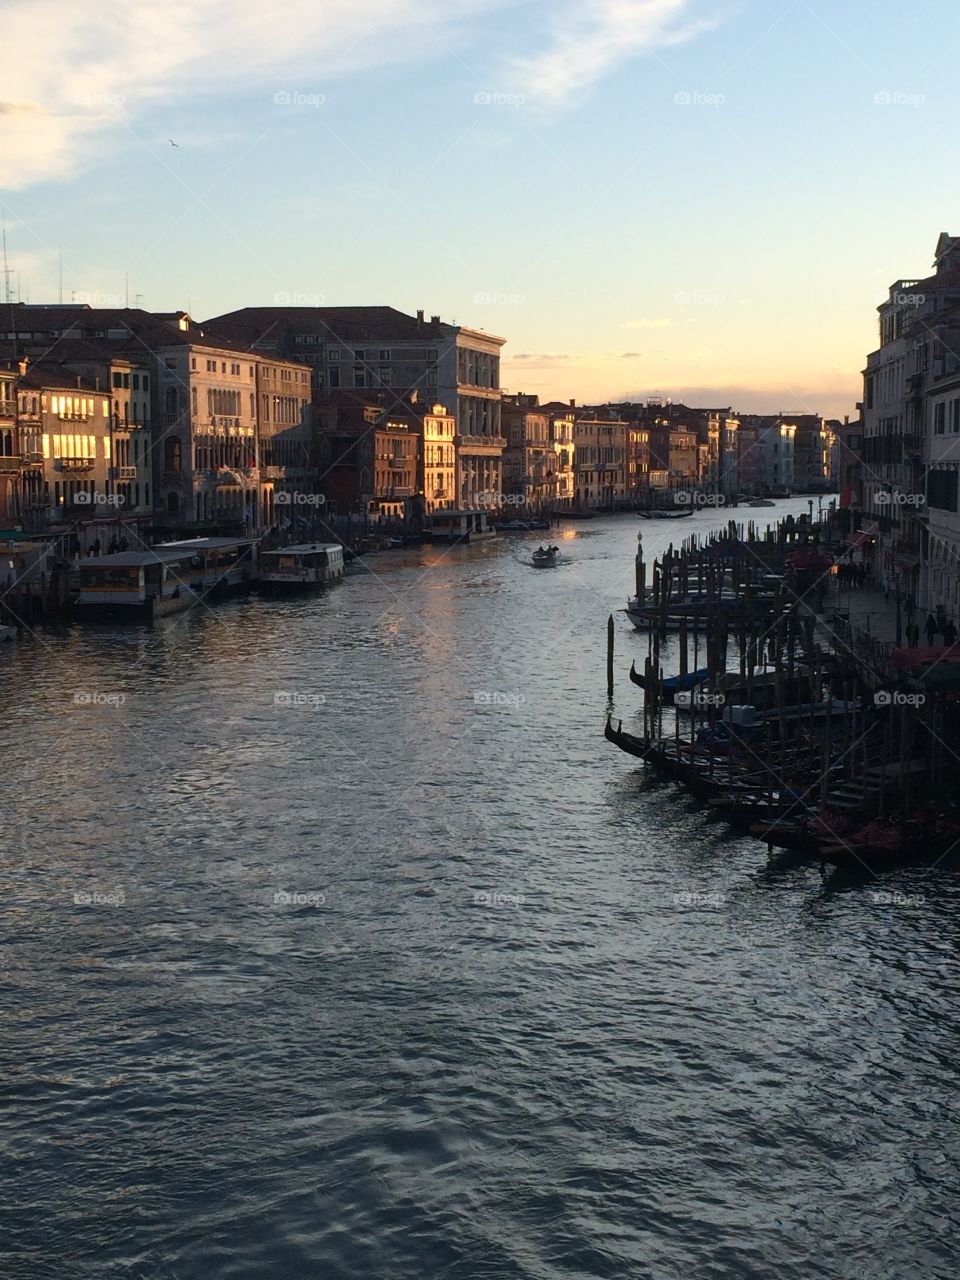 Venice at Sunset. Sunset on Venice's grand canal